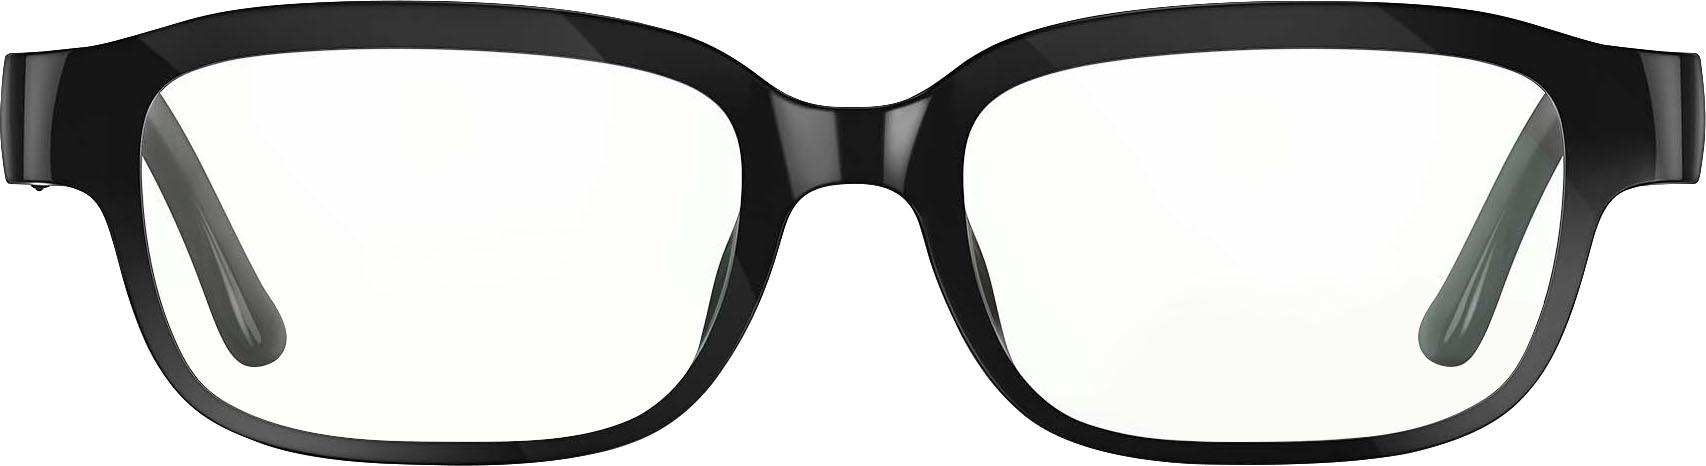 s New Echo Frames Glasses Have Better Audio and Battery